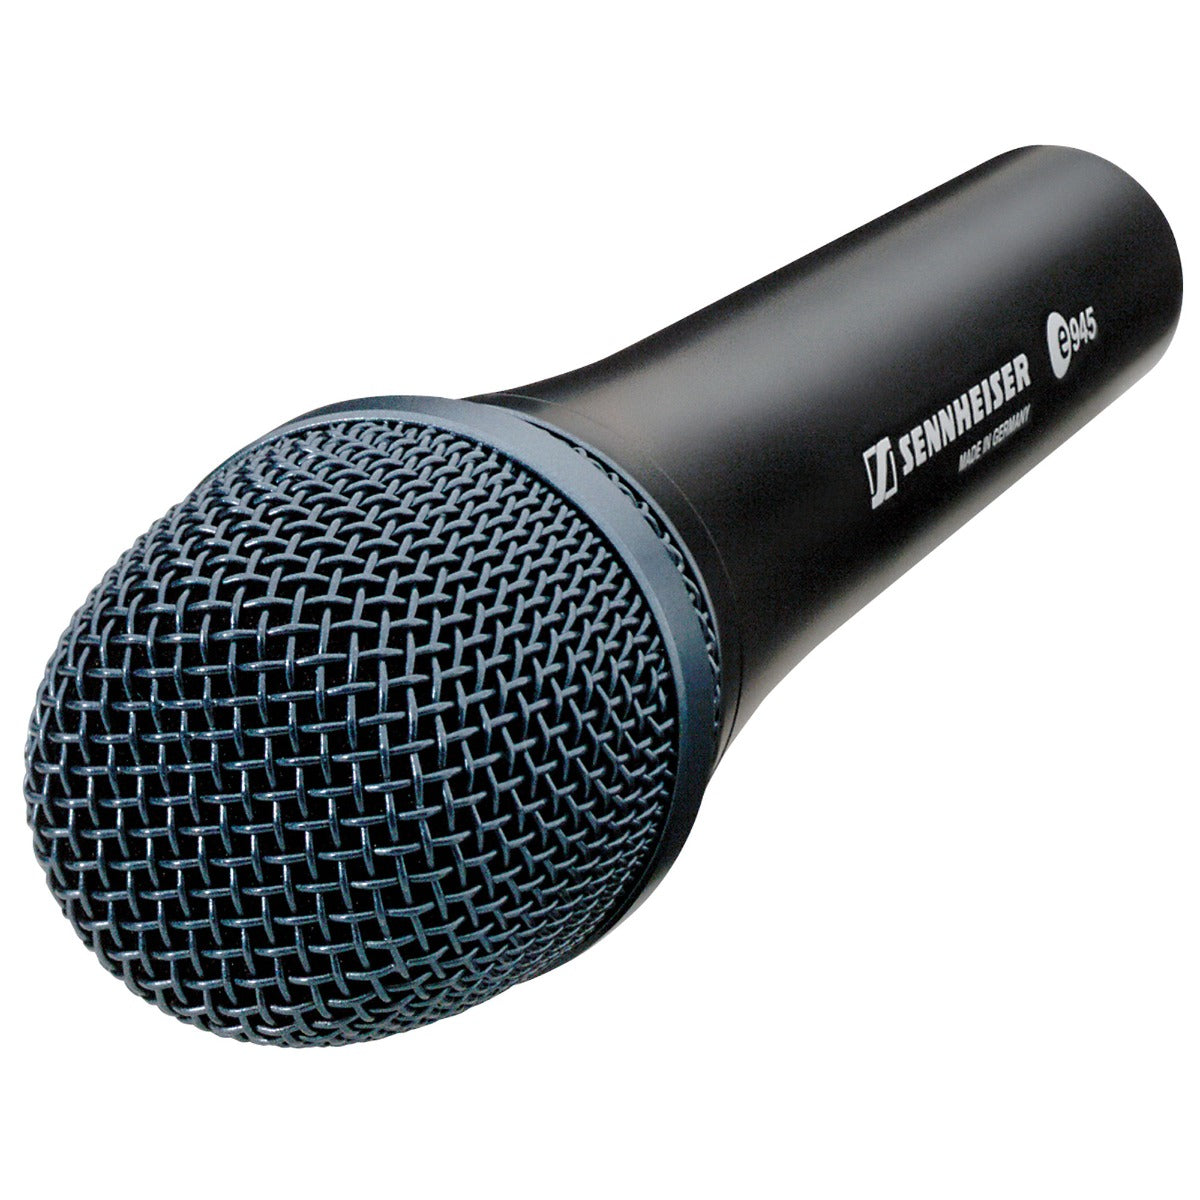 Eurosell – MICROPHONE DYNAMIC VOCAL & Stage with Cable 6.35 mm